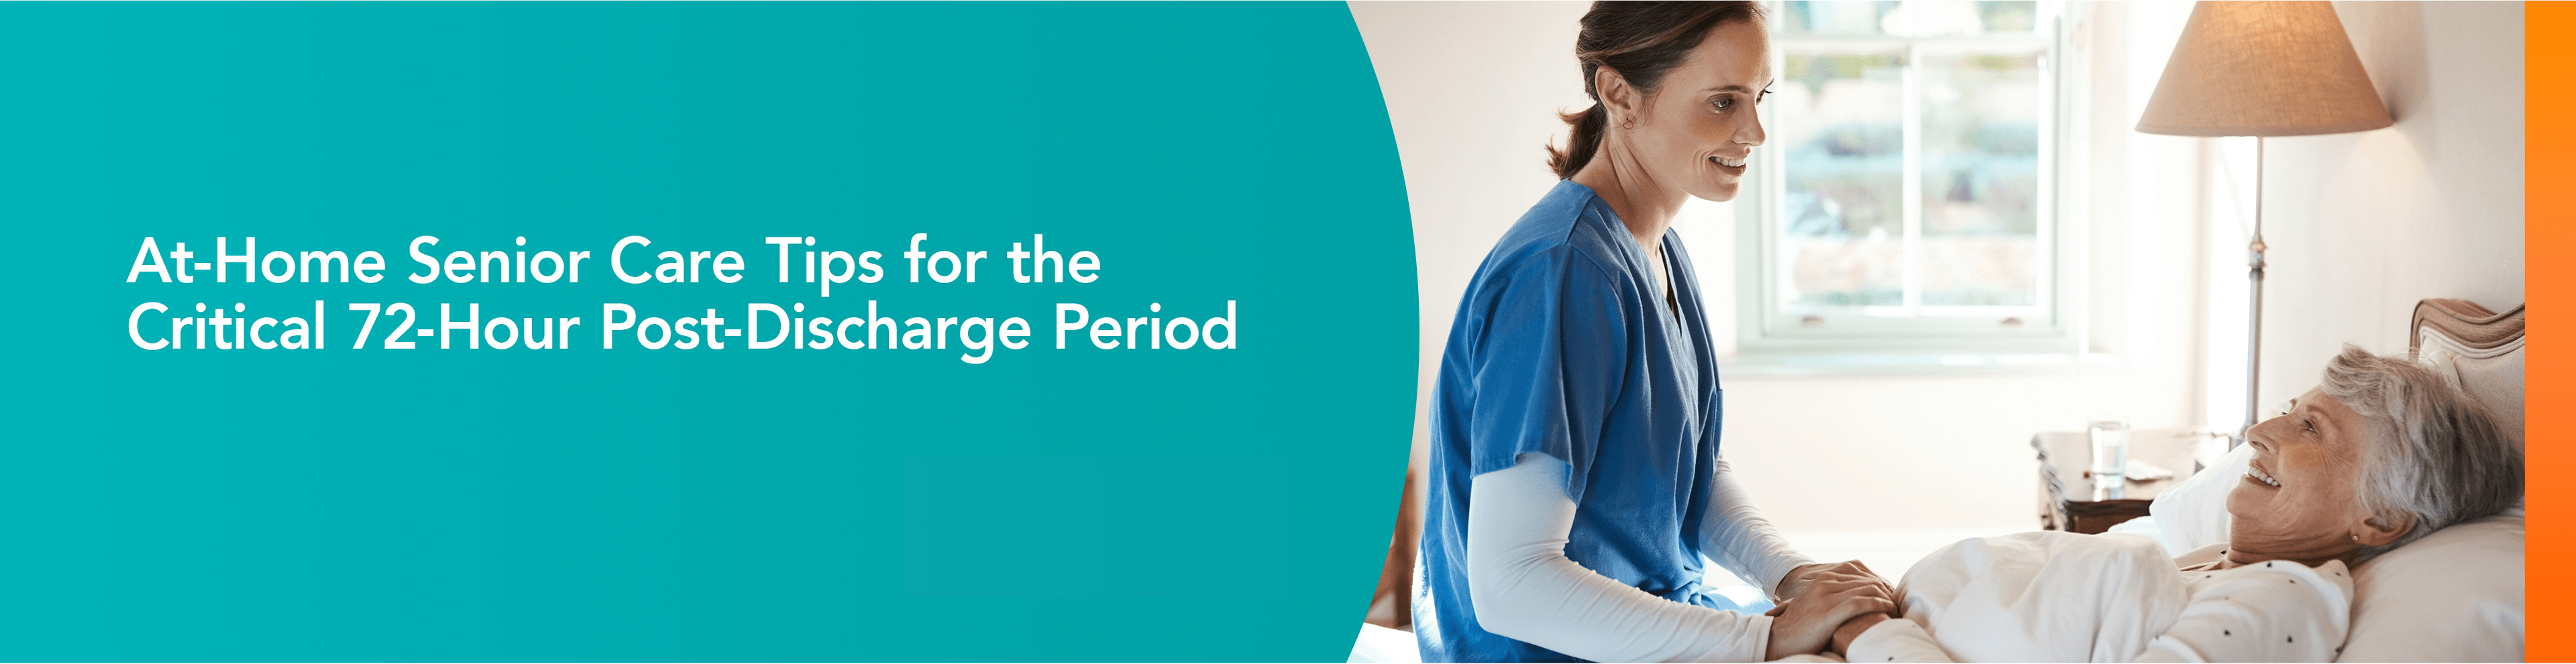 At-Home Senior Care Tips for the Critical 72-Hour Post-Discharge Period banner image